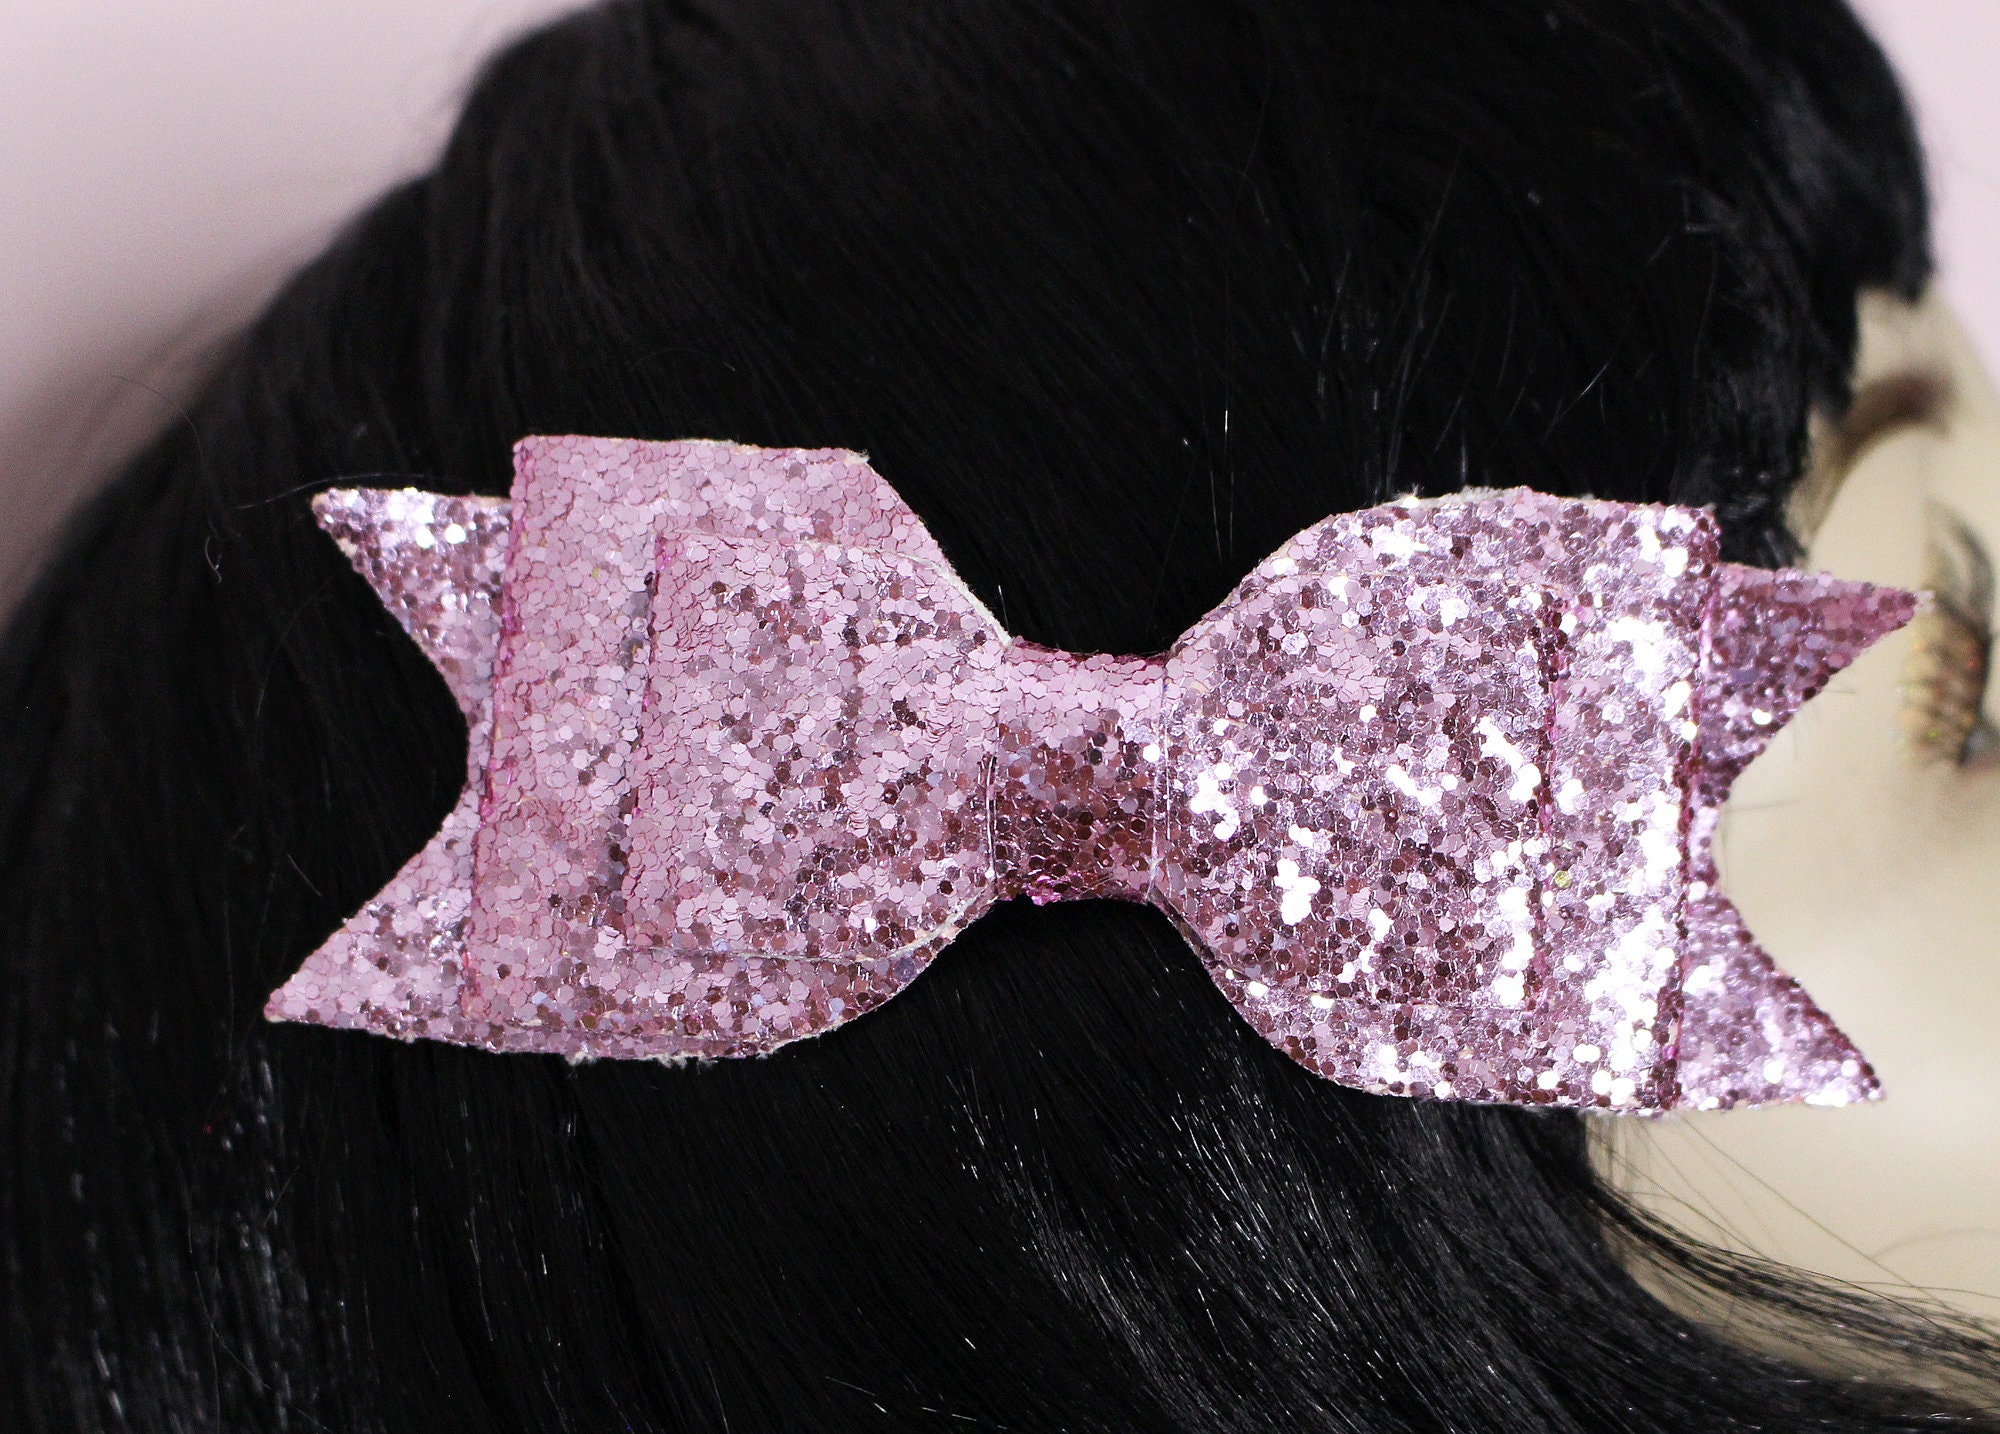 Sale Off Baby Pink Sparkly Glitter Double Hair Bow Barrette Clip